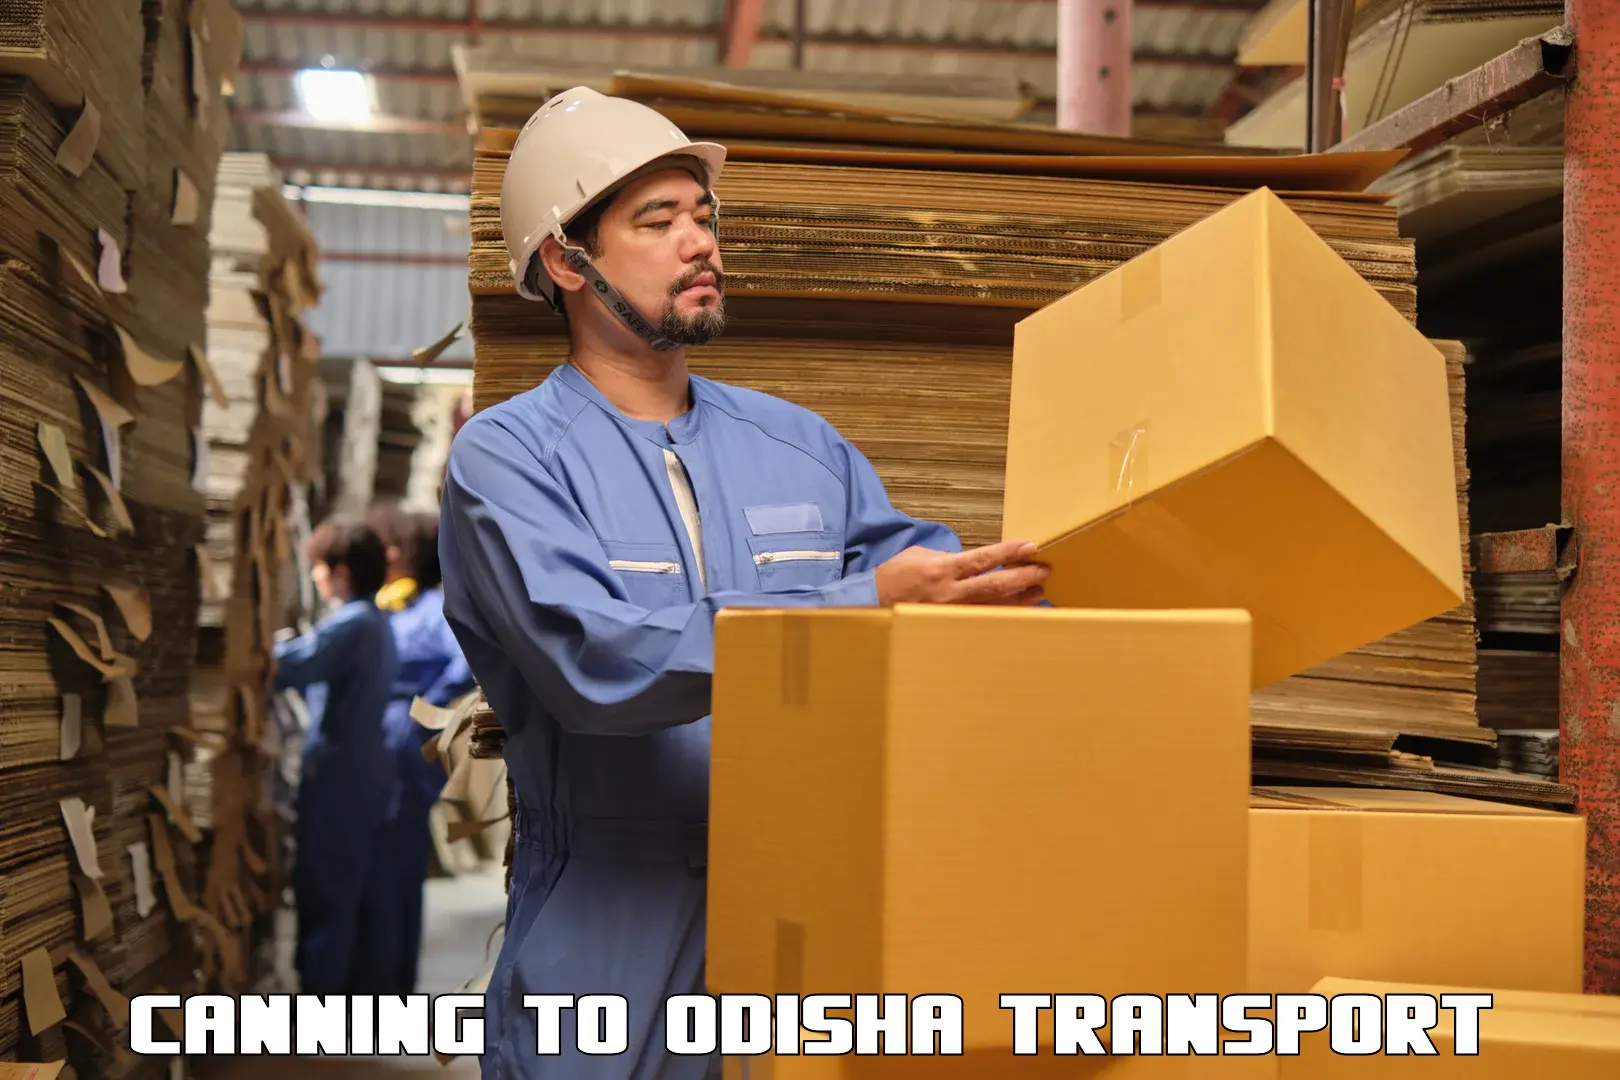 Daily transport service Canning to Odisha